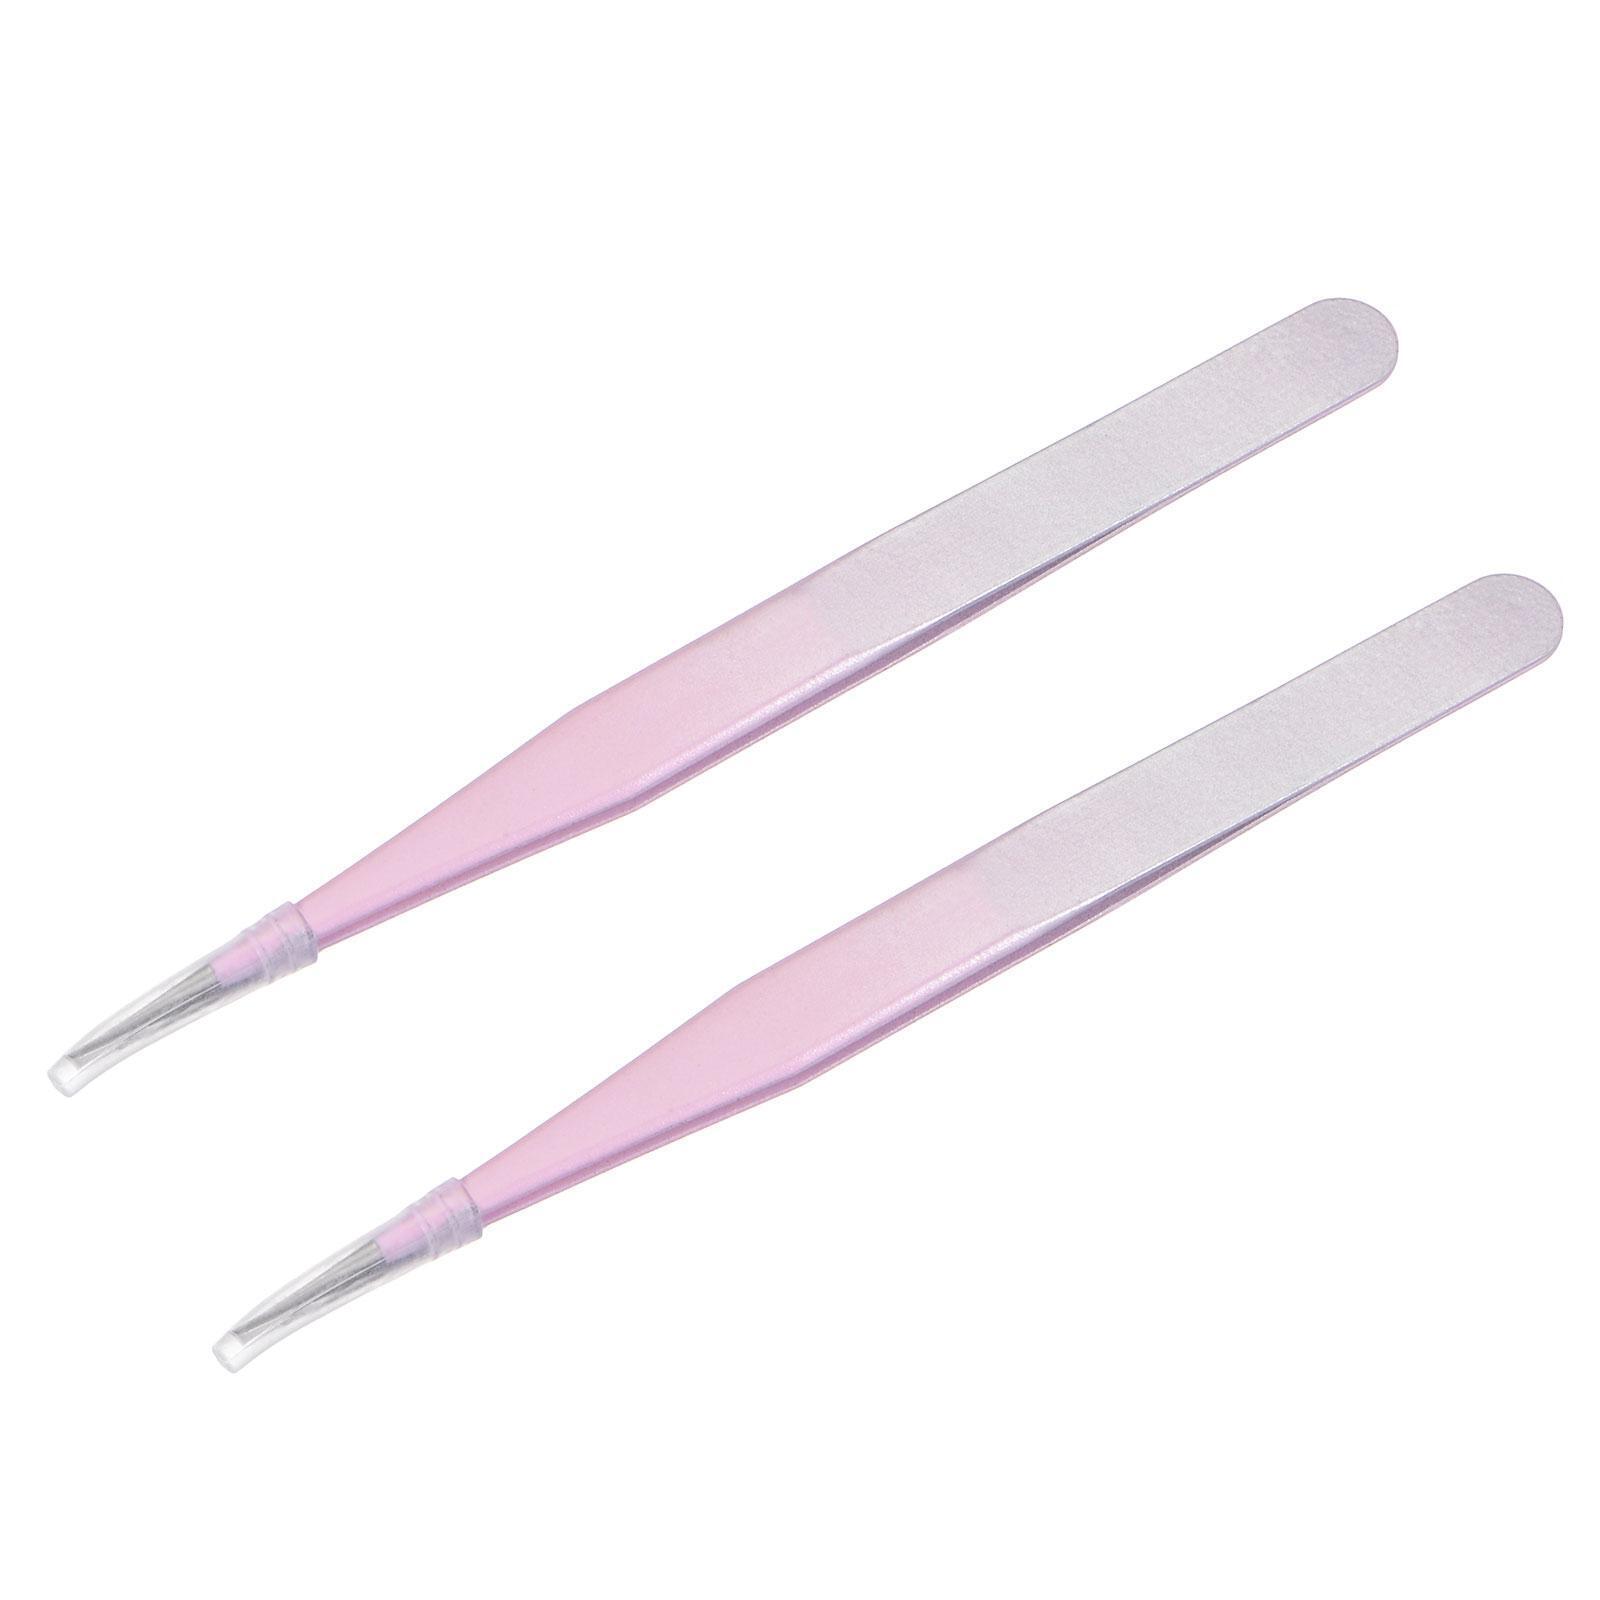 Precision Straight Tip Tweezer Stainless Steel Pink Silver Tone 2Pcs